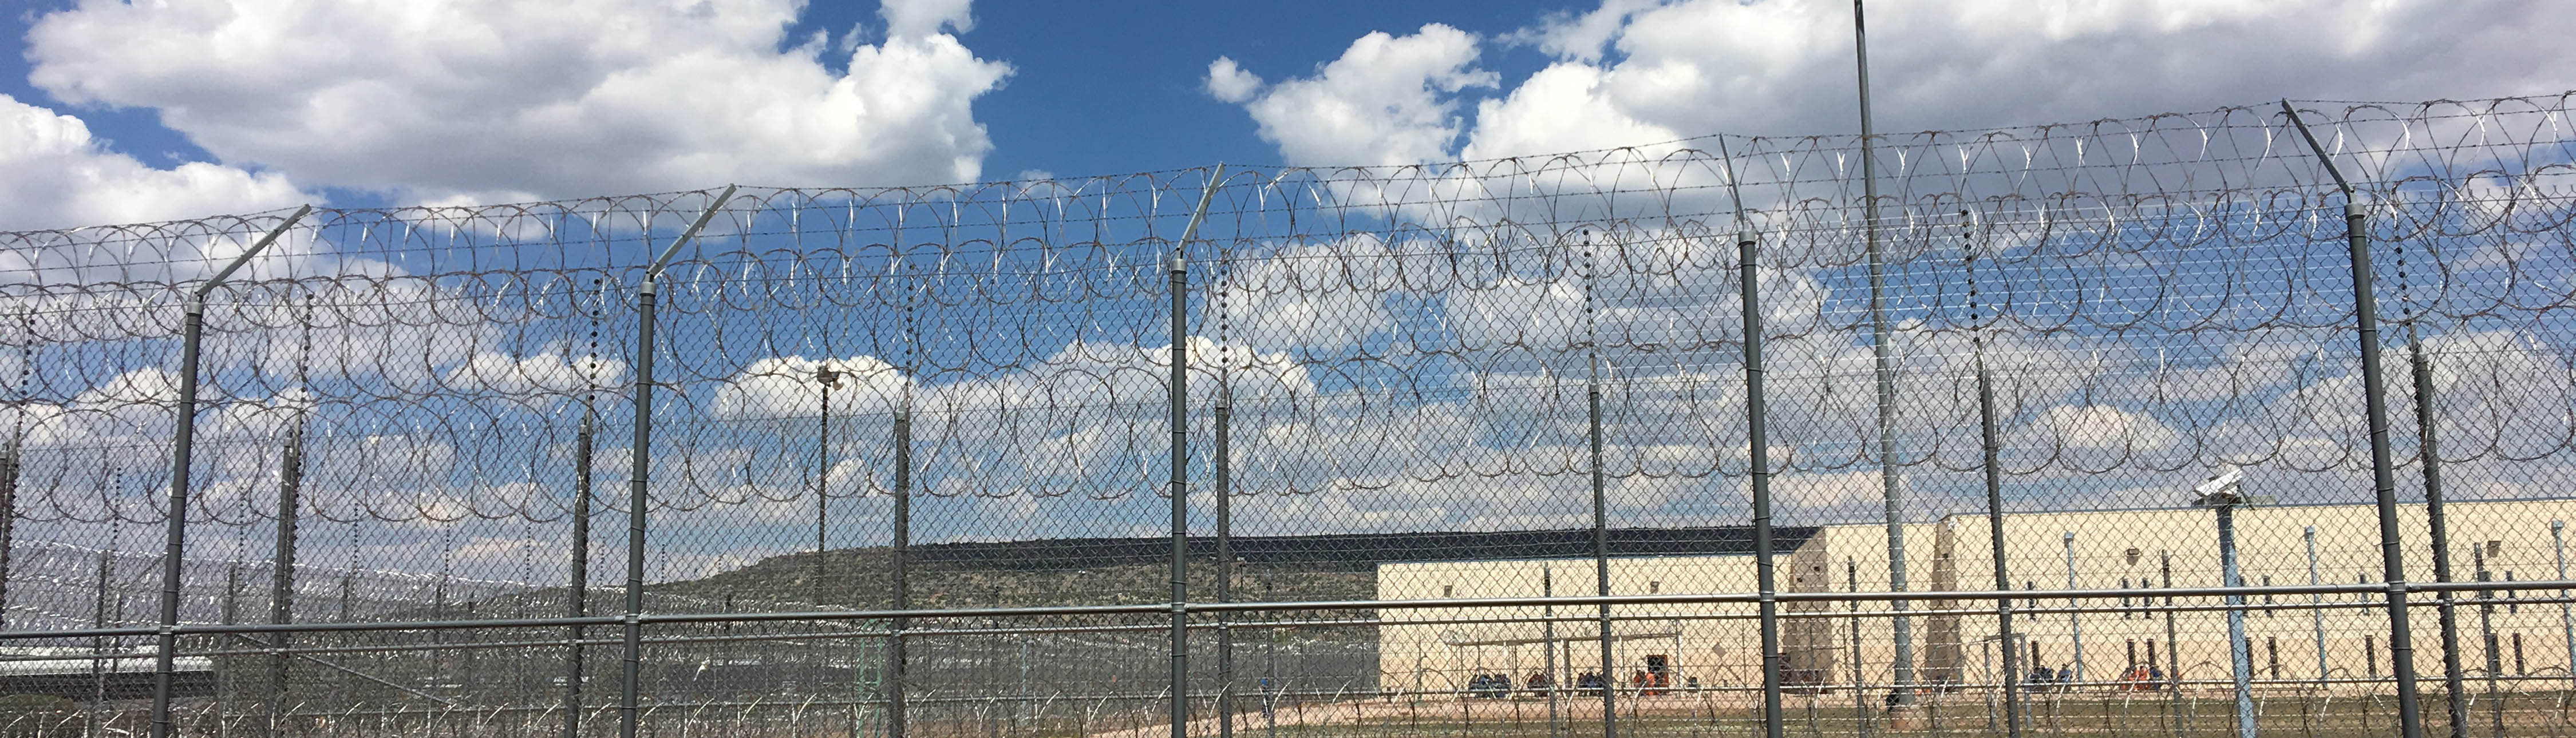 barbed wire with prison in the background